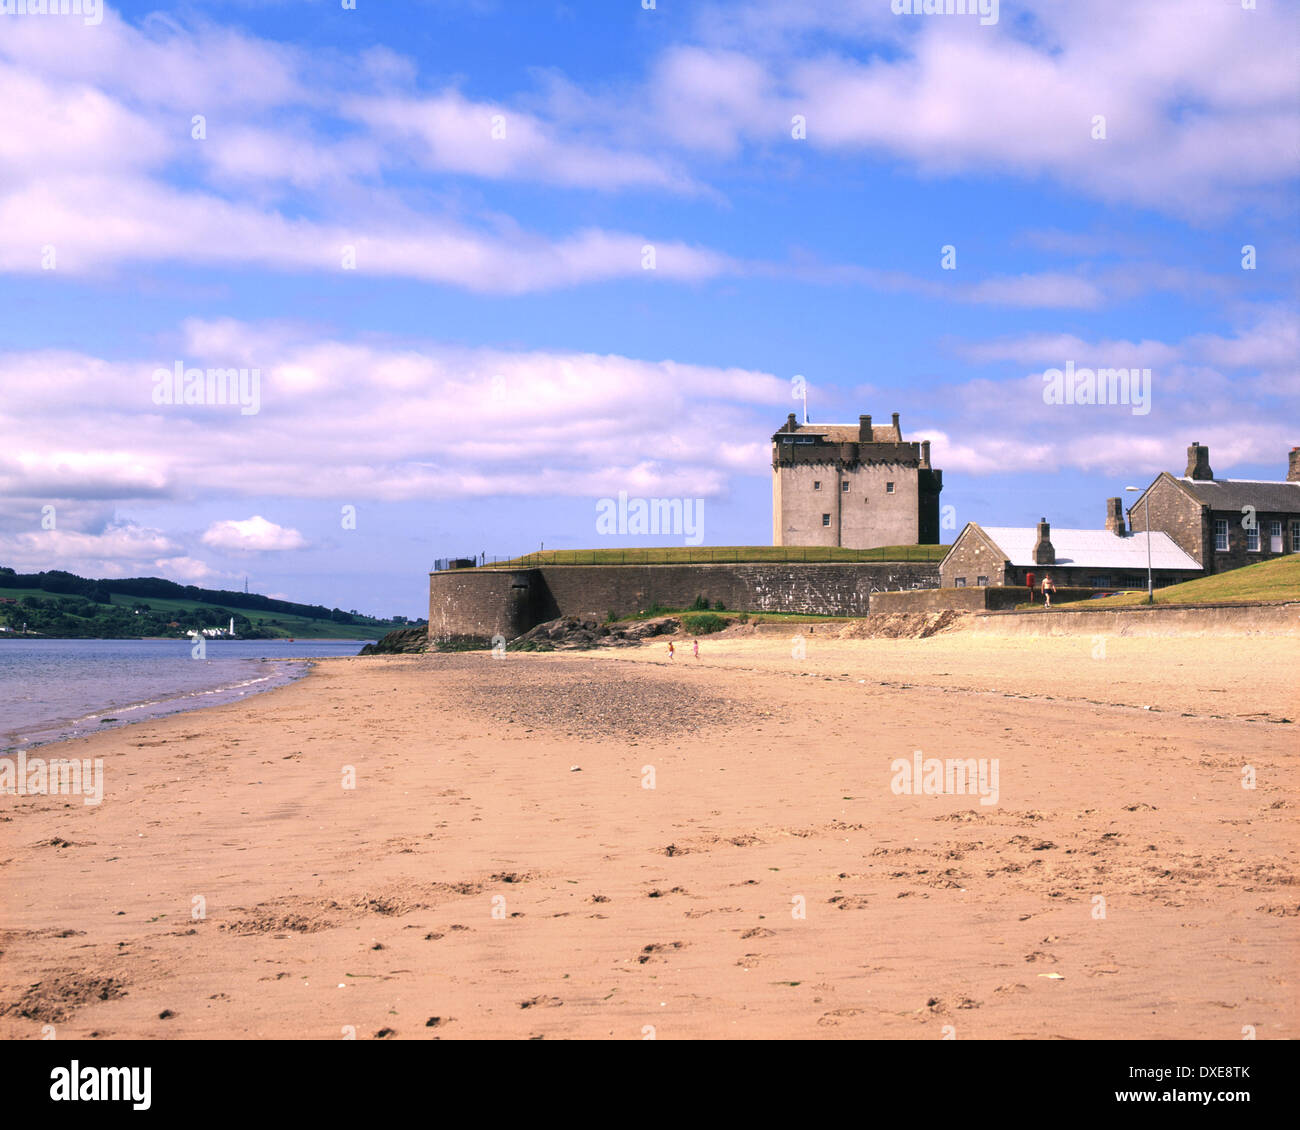 Broughty castle broughty ferry,dundee,angus, Stock Photo